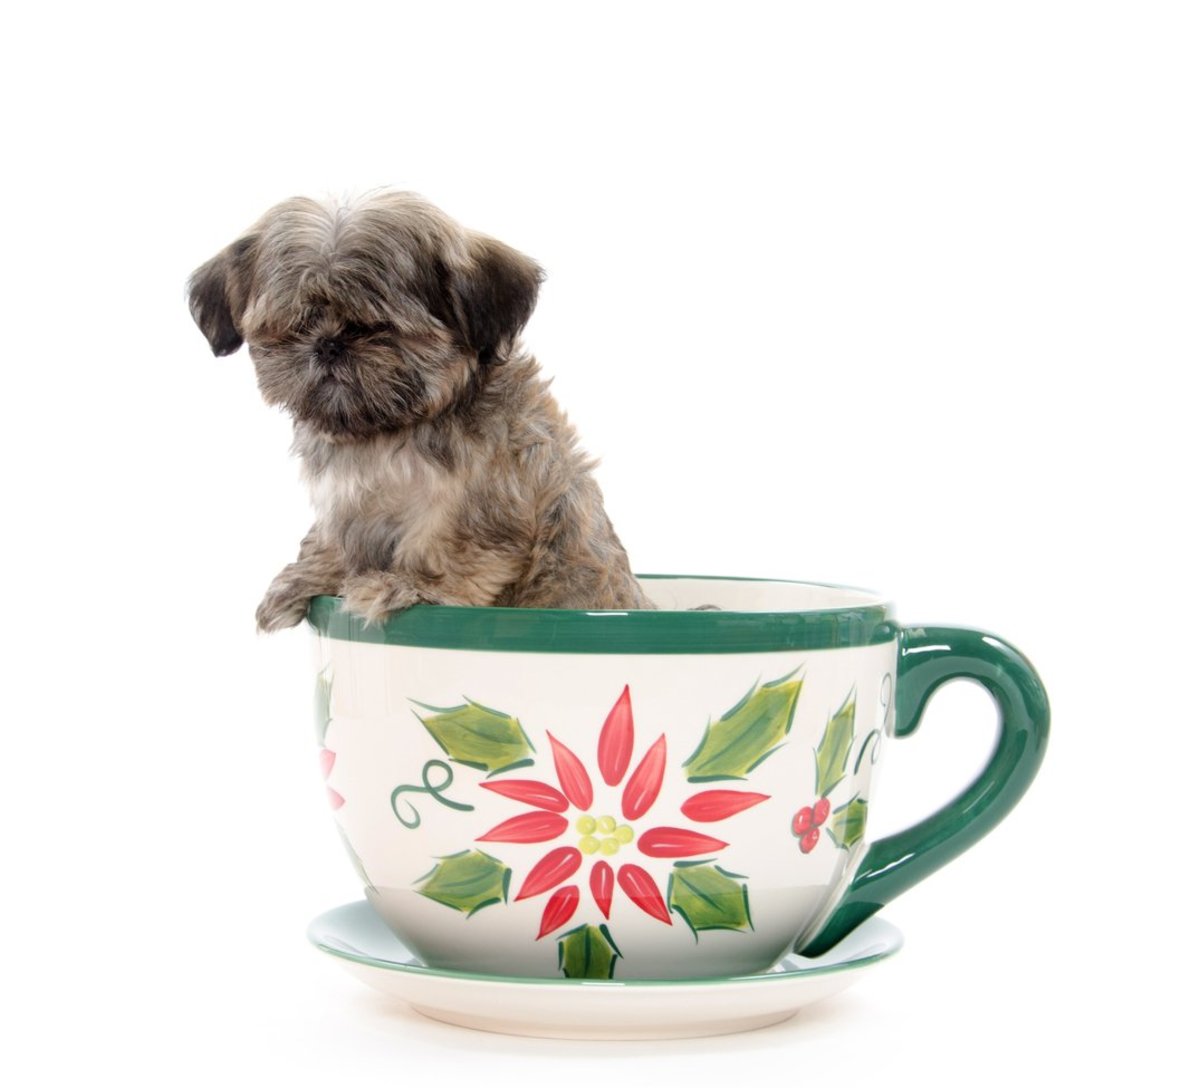 23 Miniature Pups In Cups  Tea cup dogs, Cute little puppies, Teacup dog  breeds